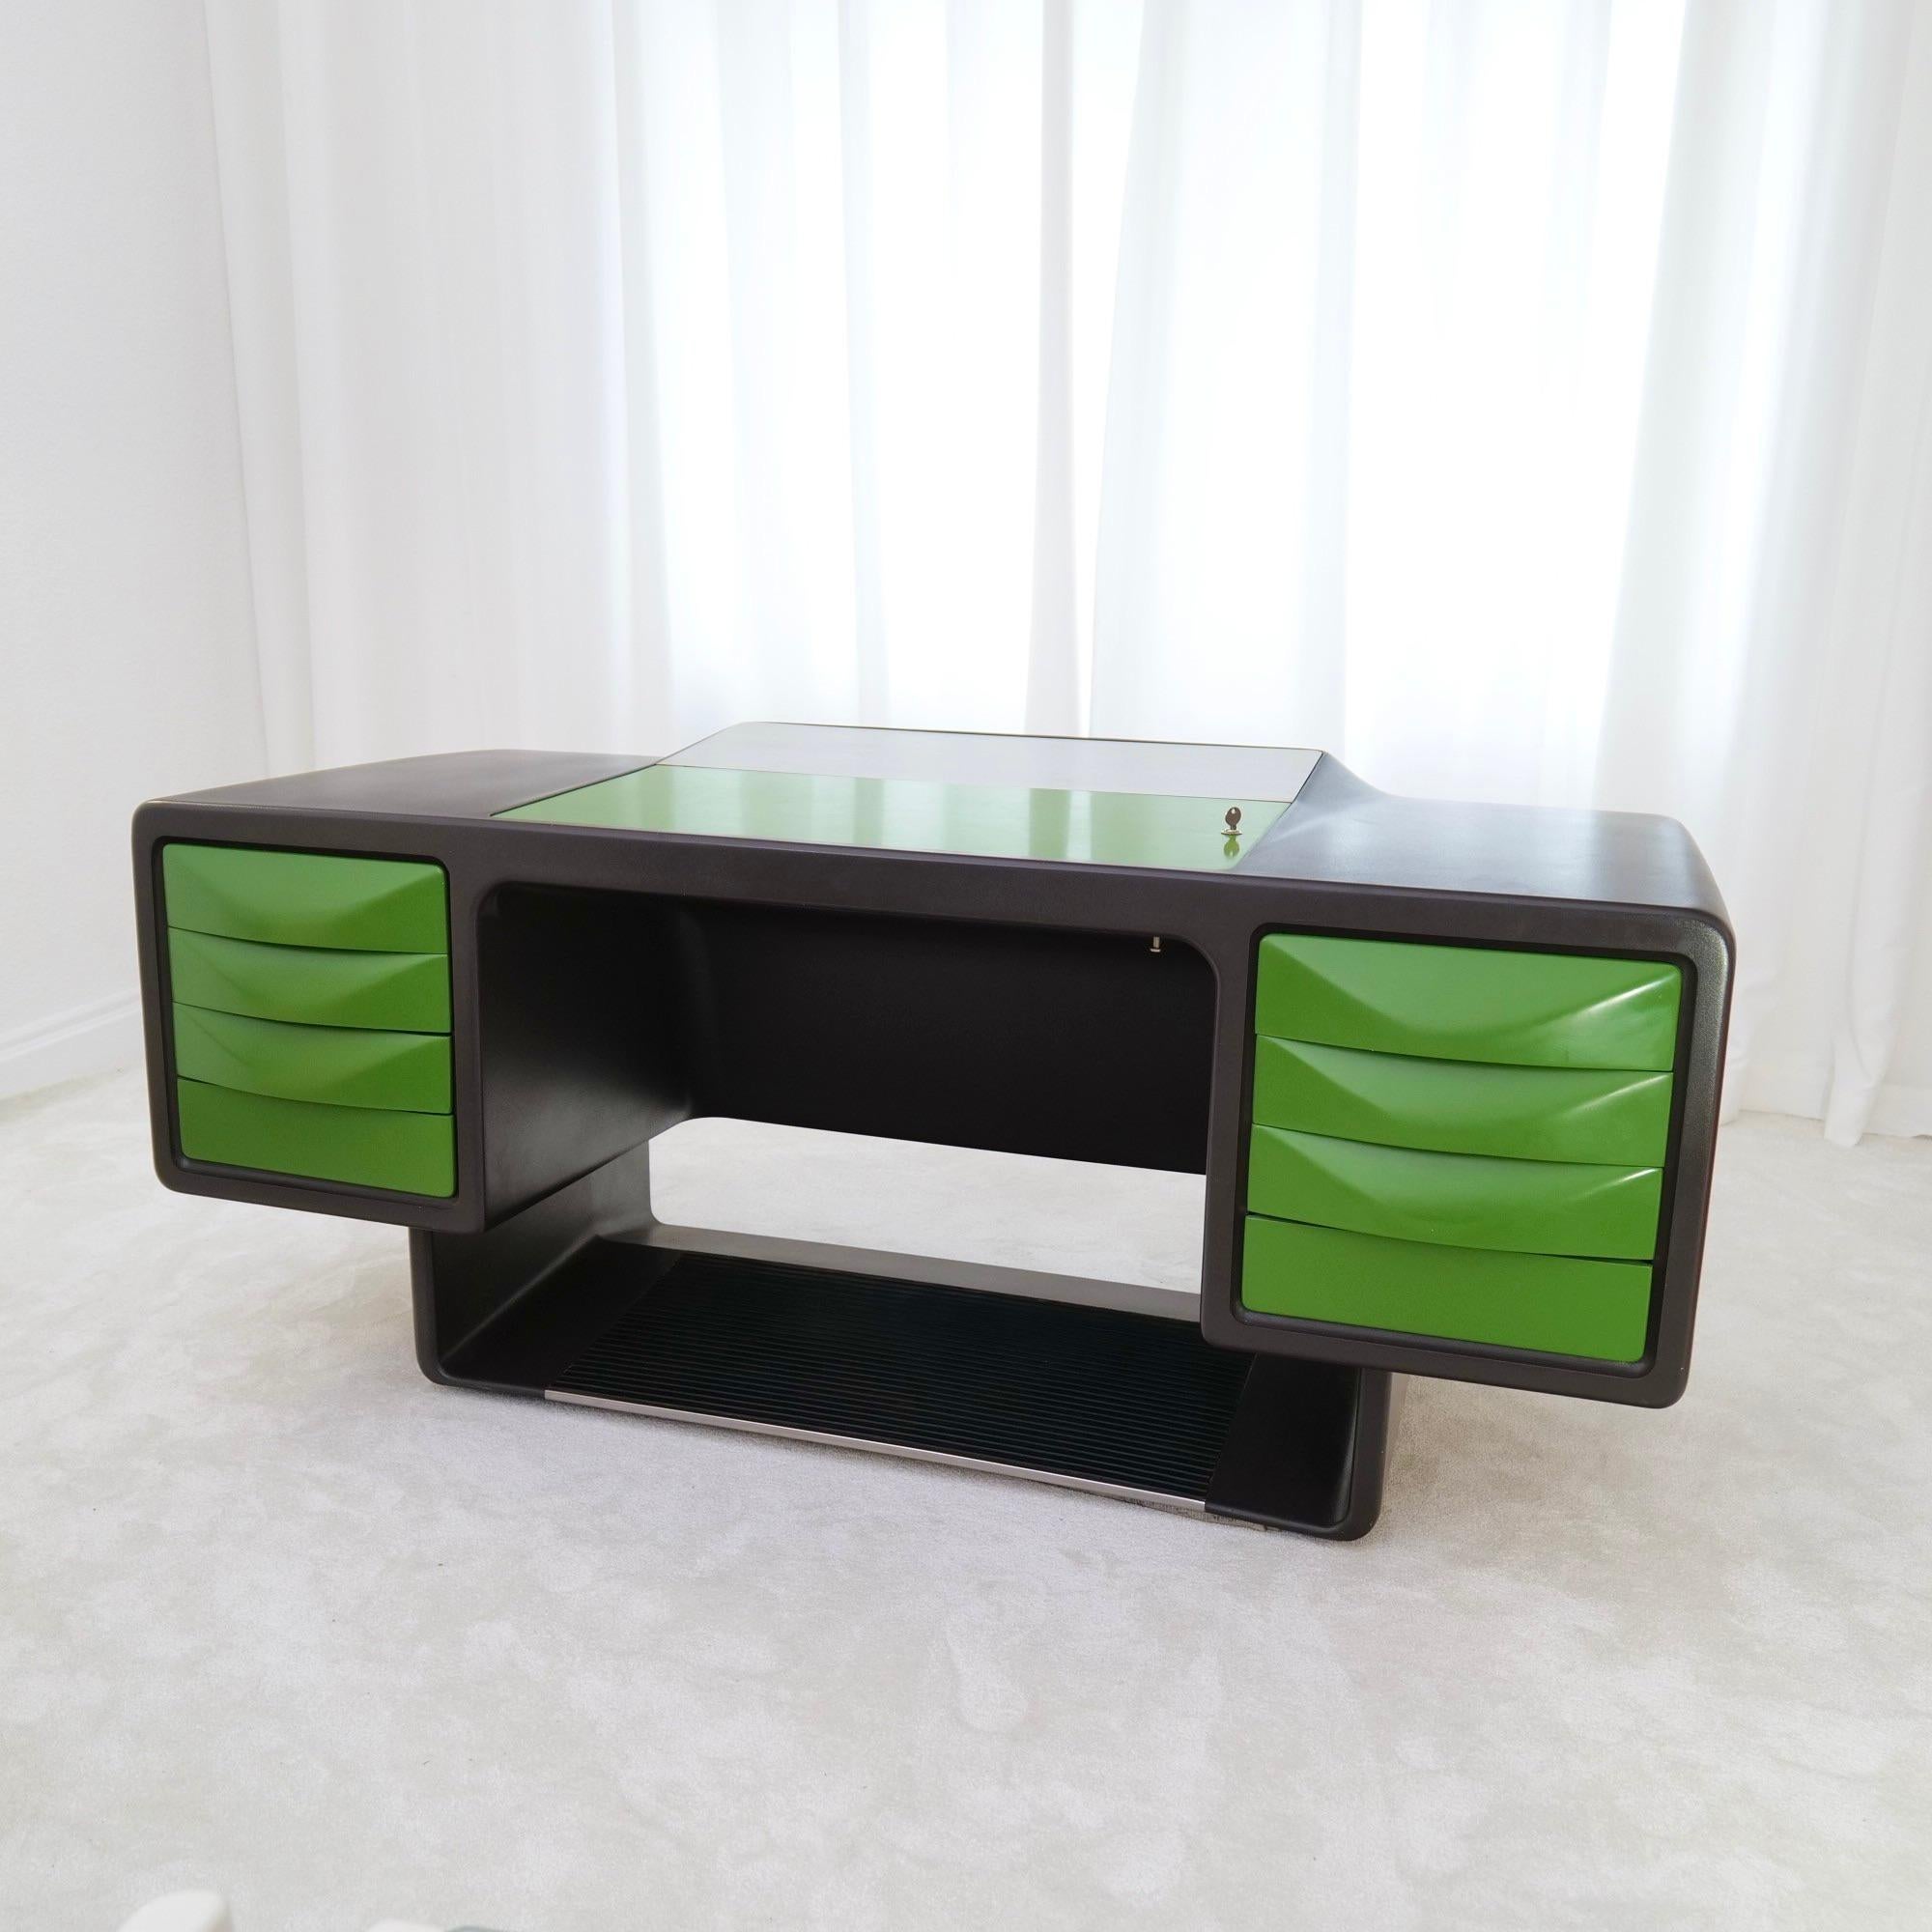 Igl Jet Top directors desk made out of Baydur (Fiberglas)

The material Baydur developed specifically for the table by Bayer AG in the 1970s. The properties of this material proved to be particularly strong. Special shapes, such as the appearance